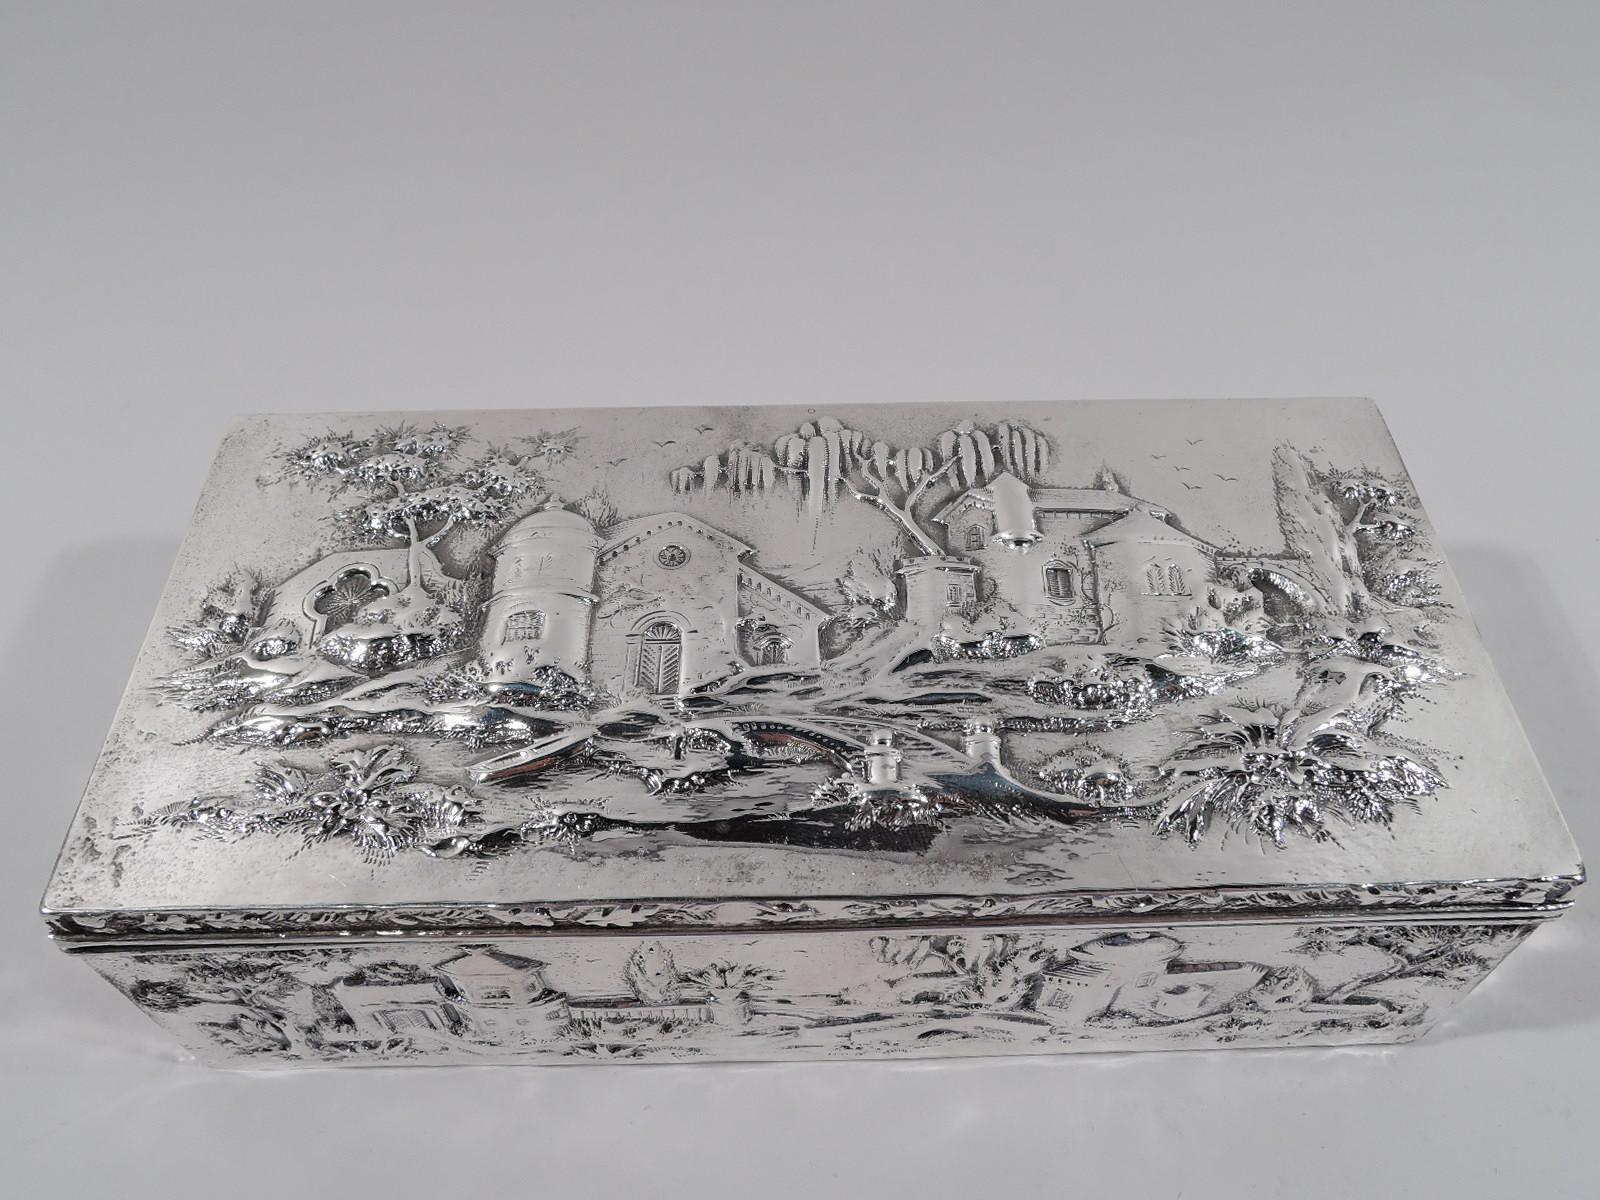 Edwardian sterling silver box. Made by S. Kirk & Son Co. in Baltimore. Rectangular with straight sides and hinged cover. Chased picturesque architecture: Turrets, towers, and footbridges in bosky landscape. Box interior cedar lined. Fully marked